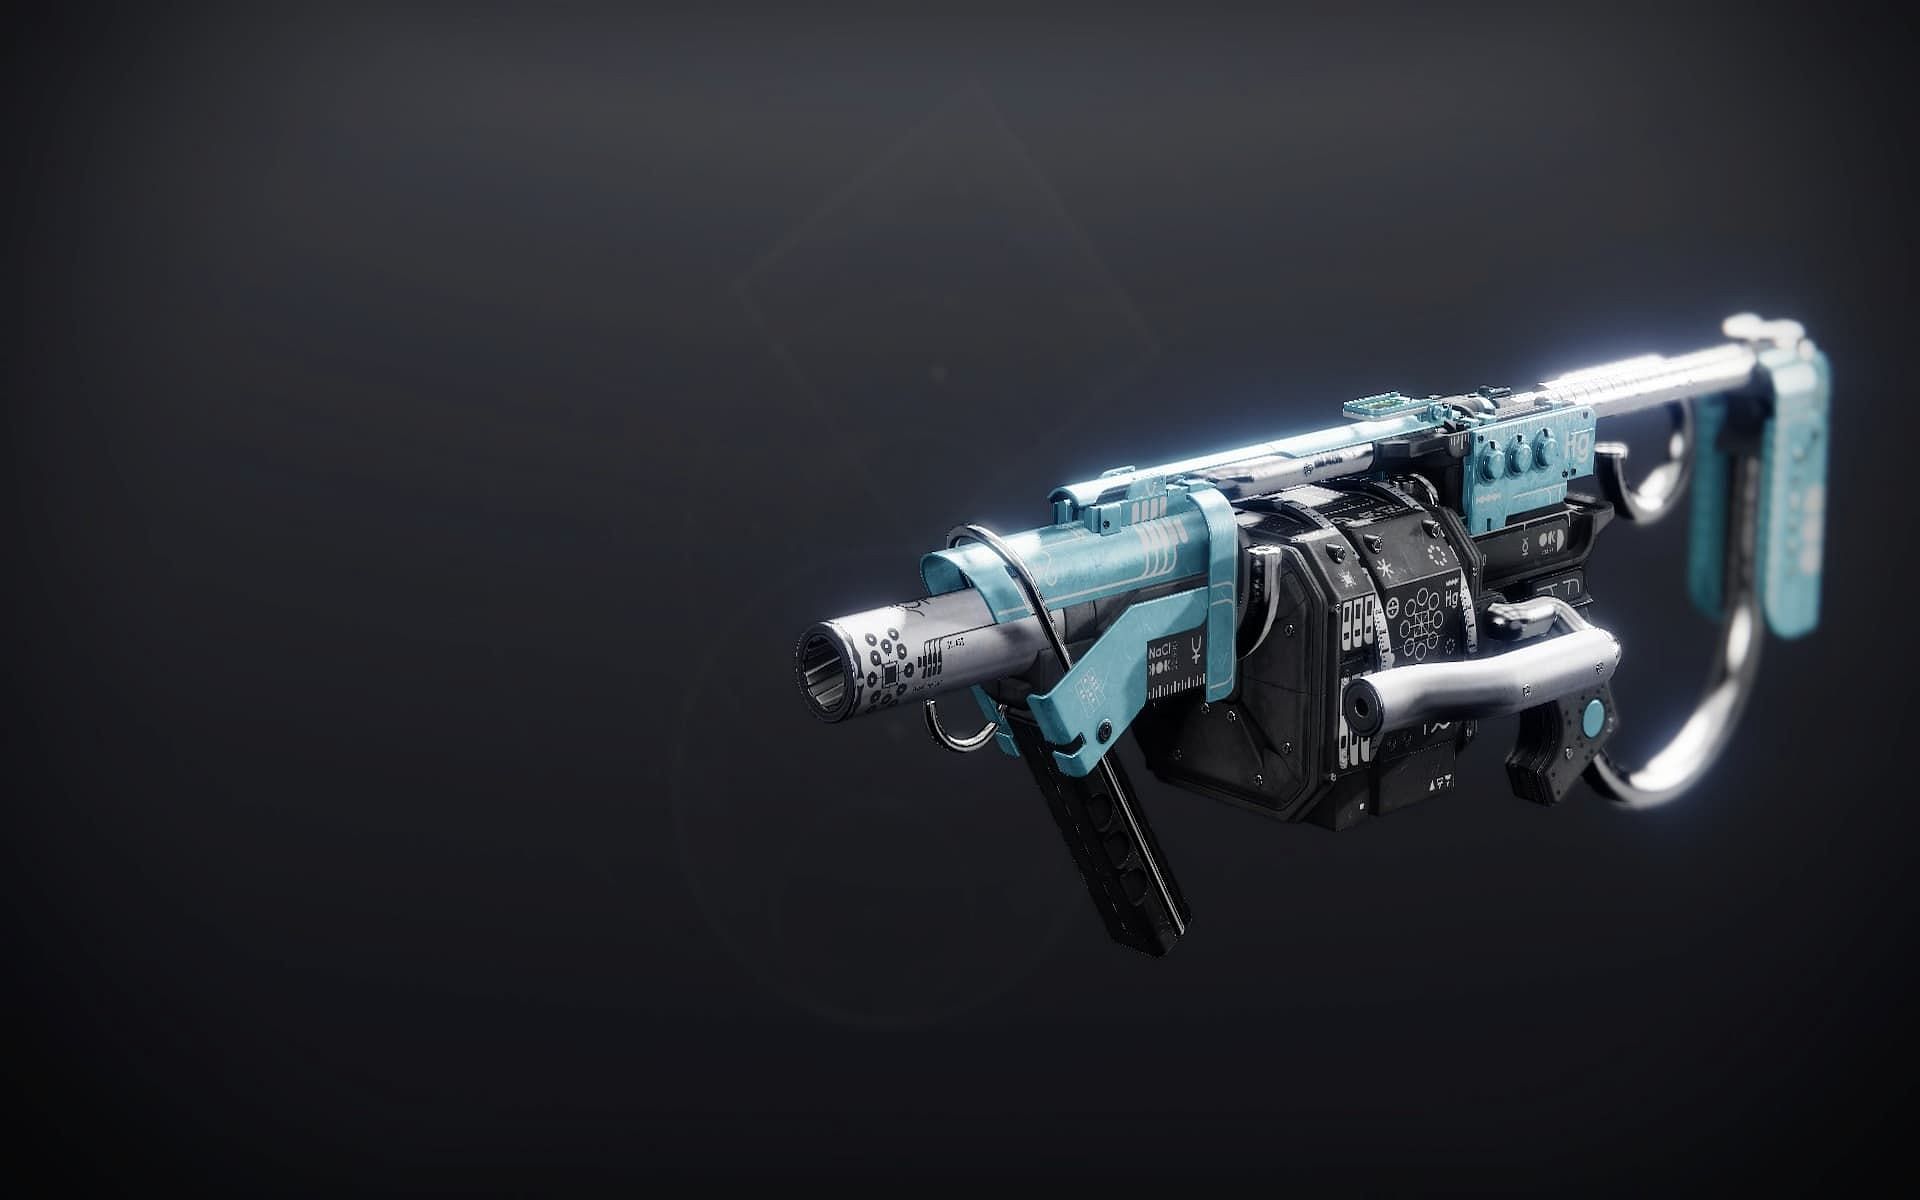 A look at the Tarnation weapon in Destiny 2 (Image via Bungie)